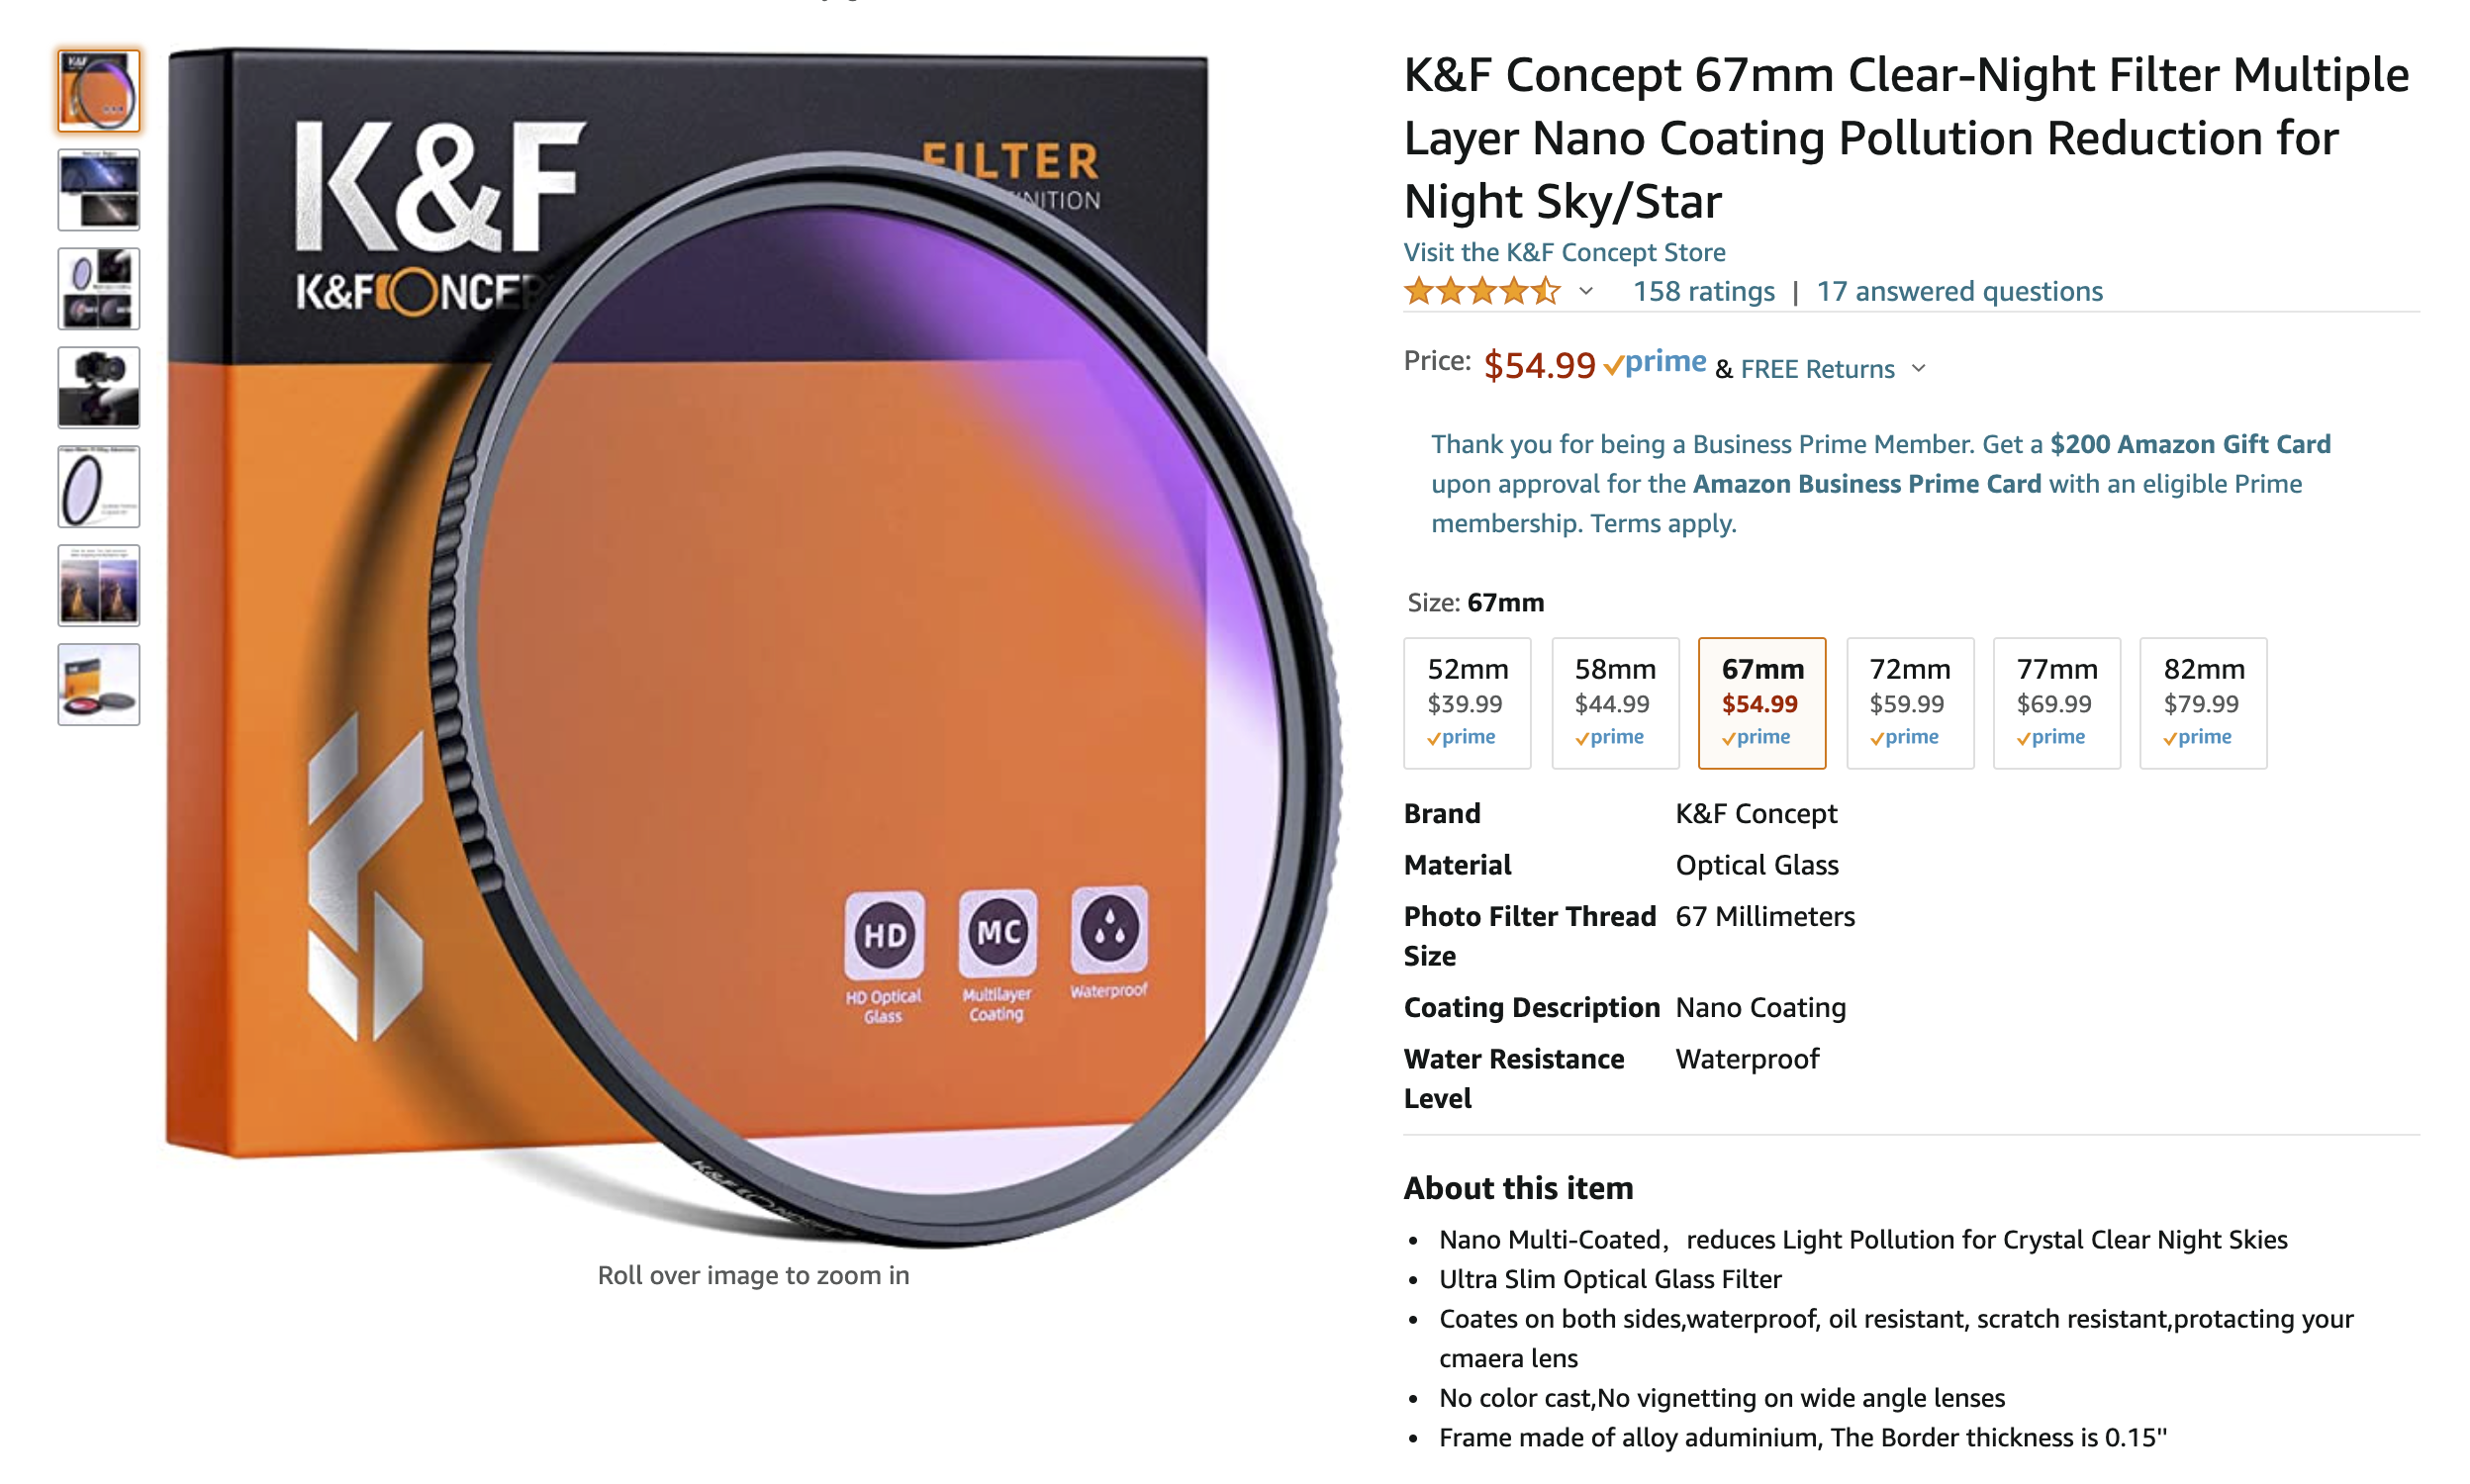 Get Up to 20% Off on K&F Concept Filters with Our Exclusive Code!